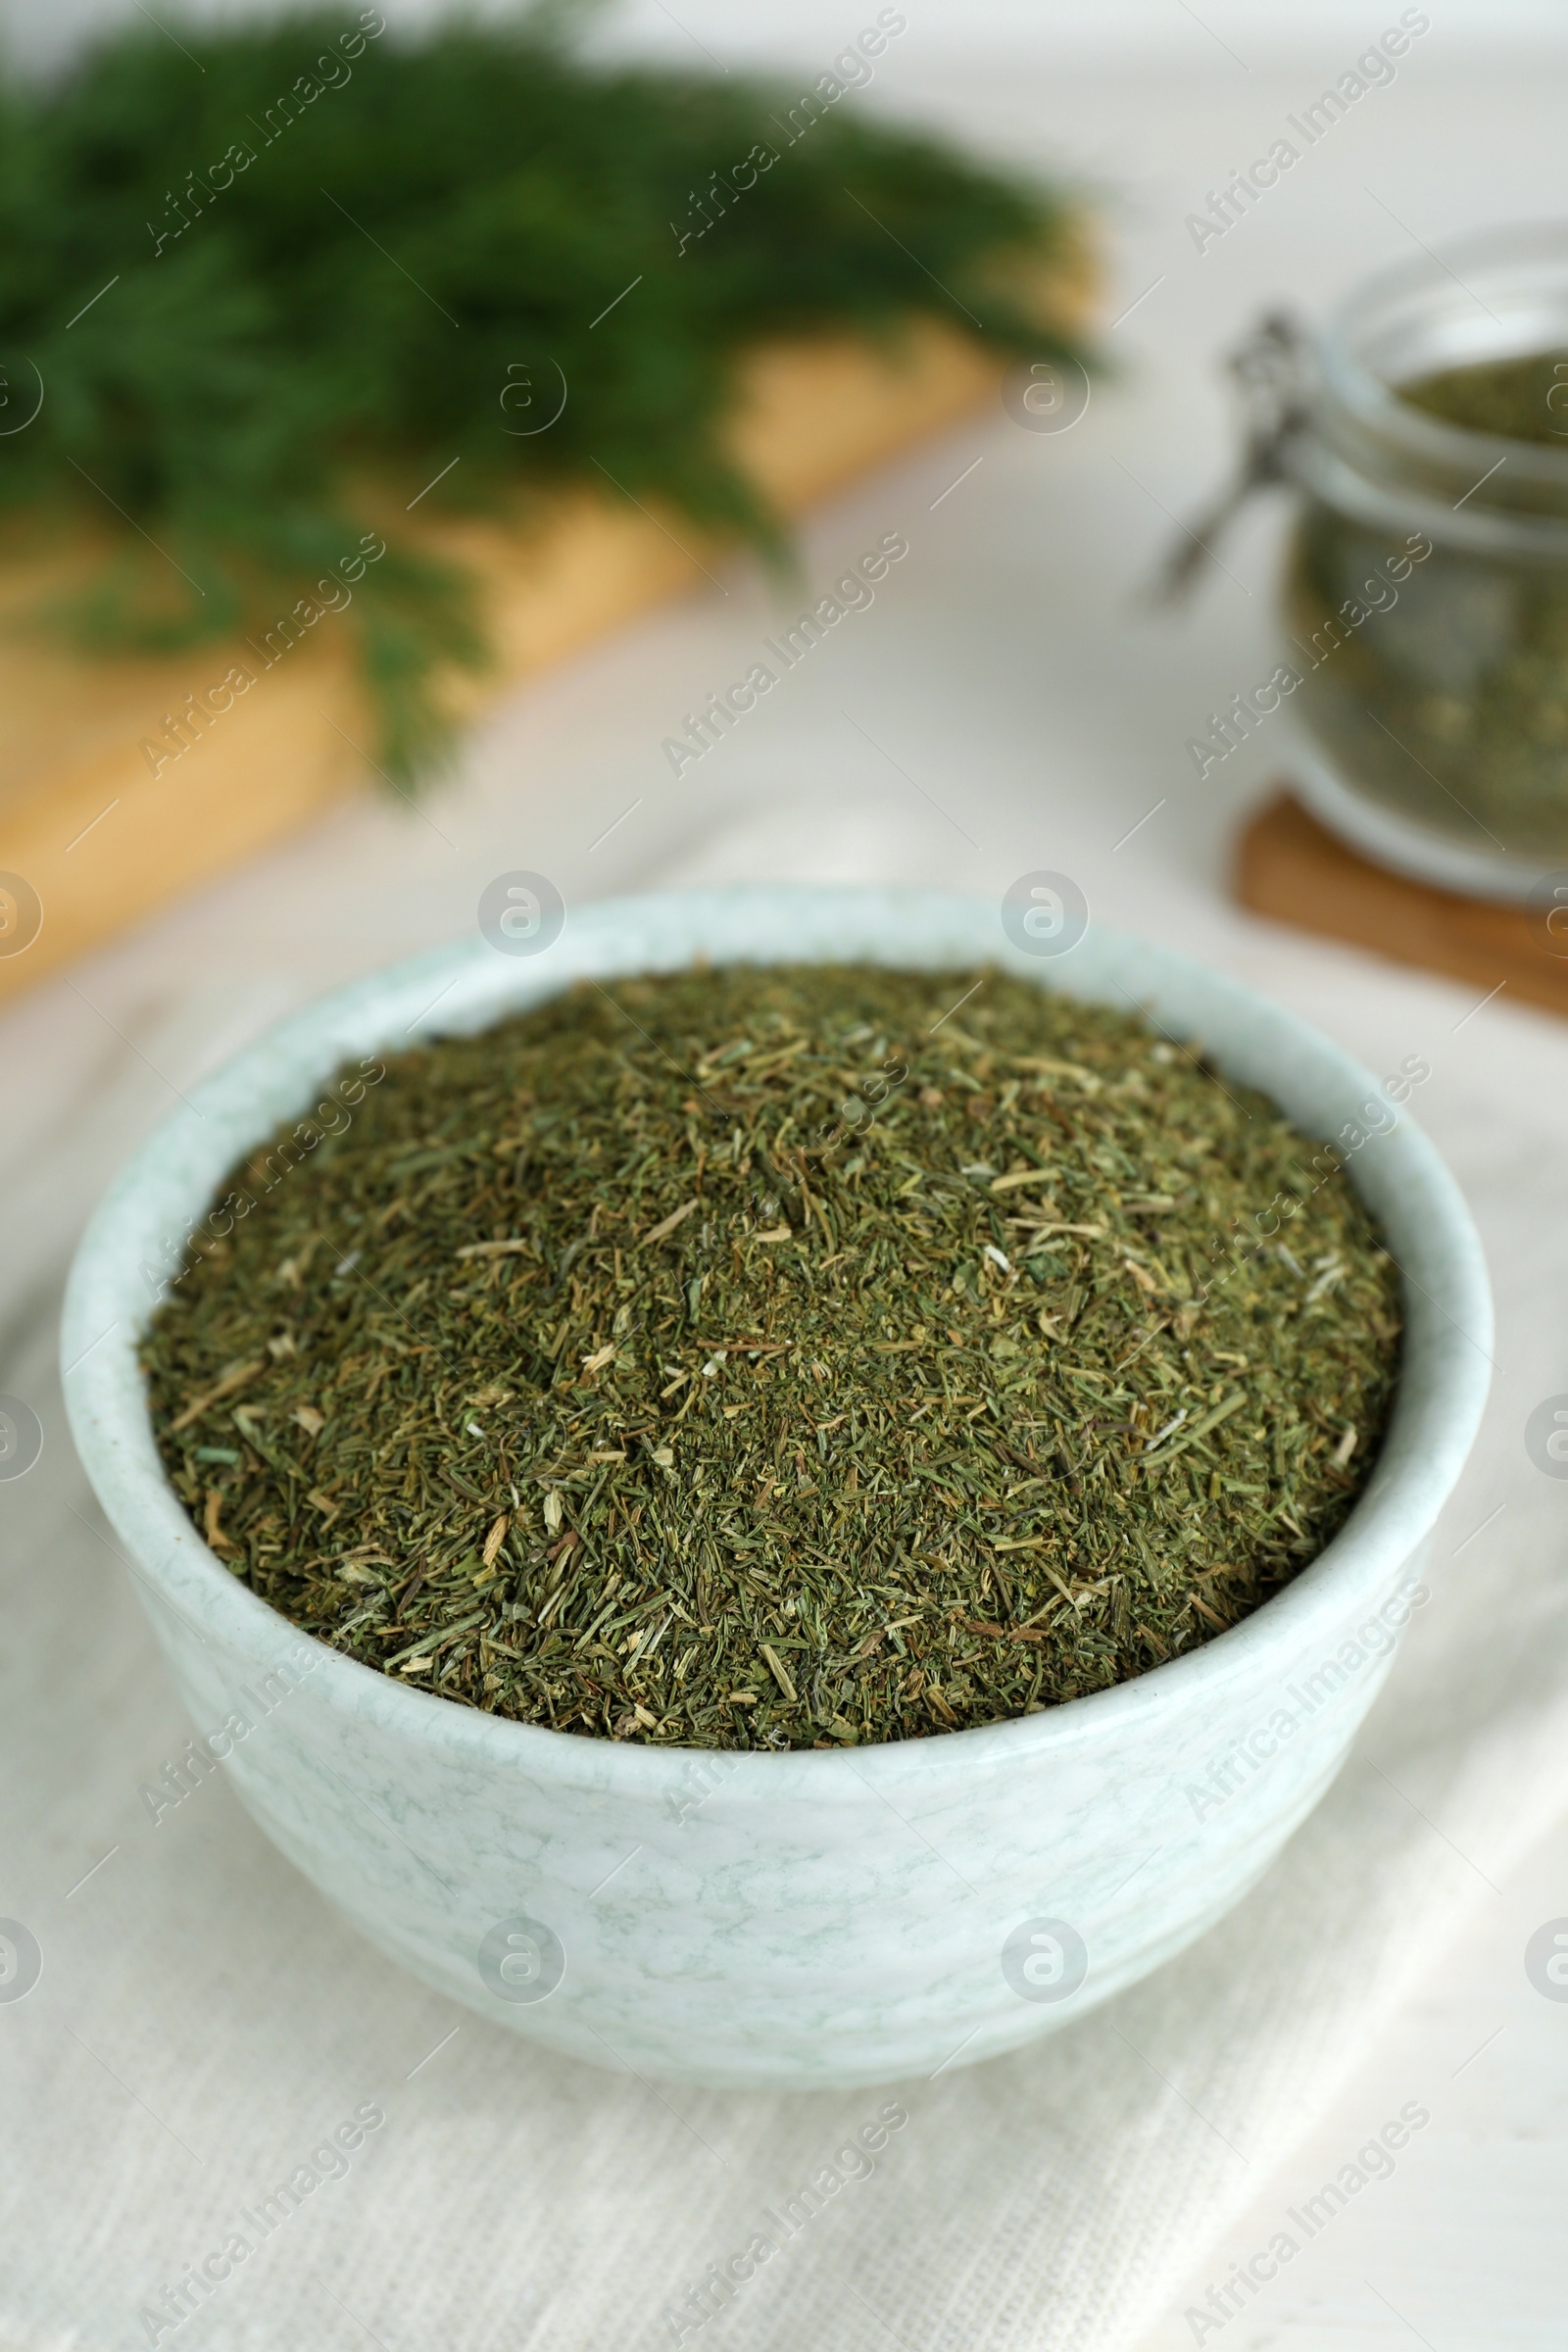 Photo of Dried dill in bowl on table, closeup